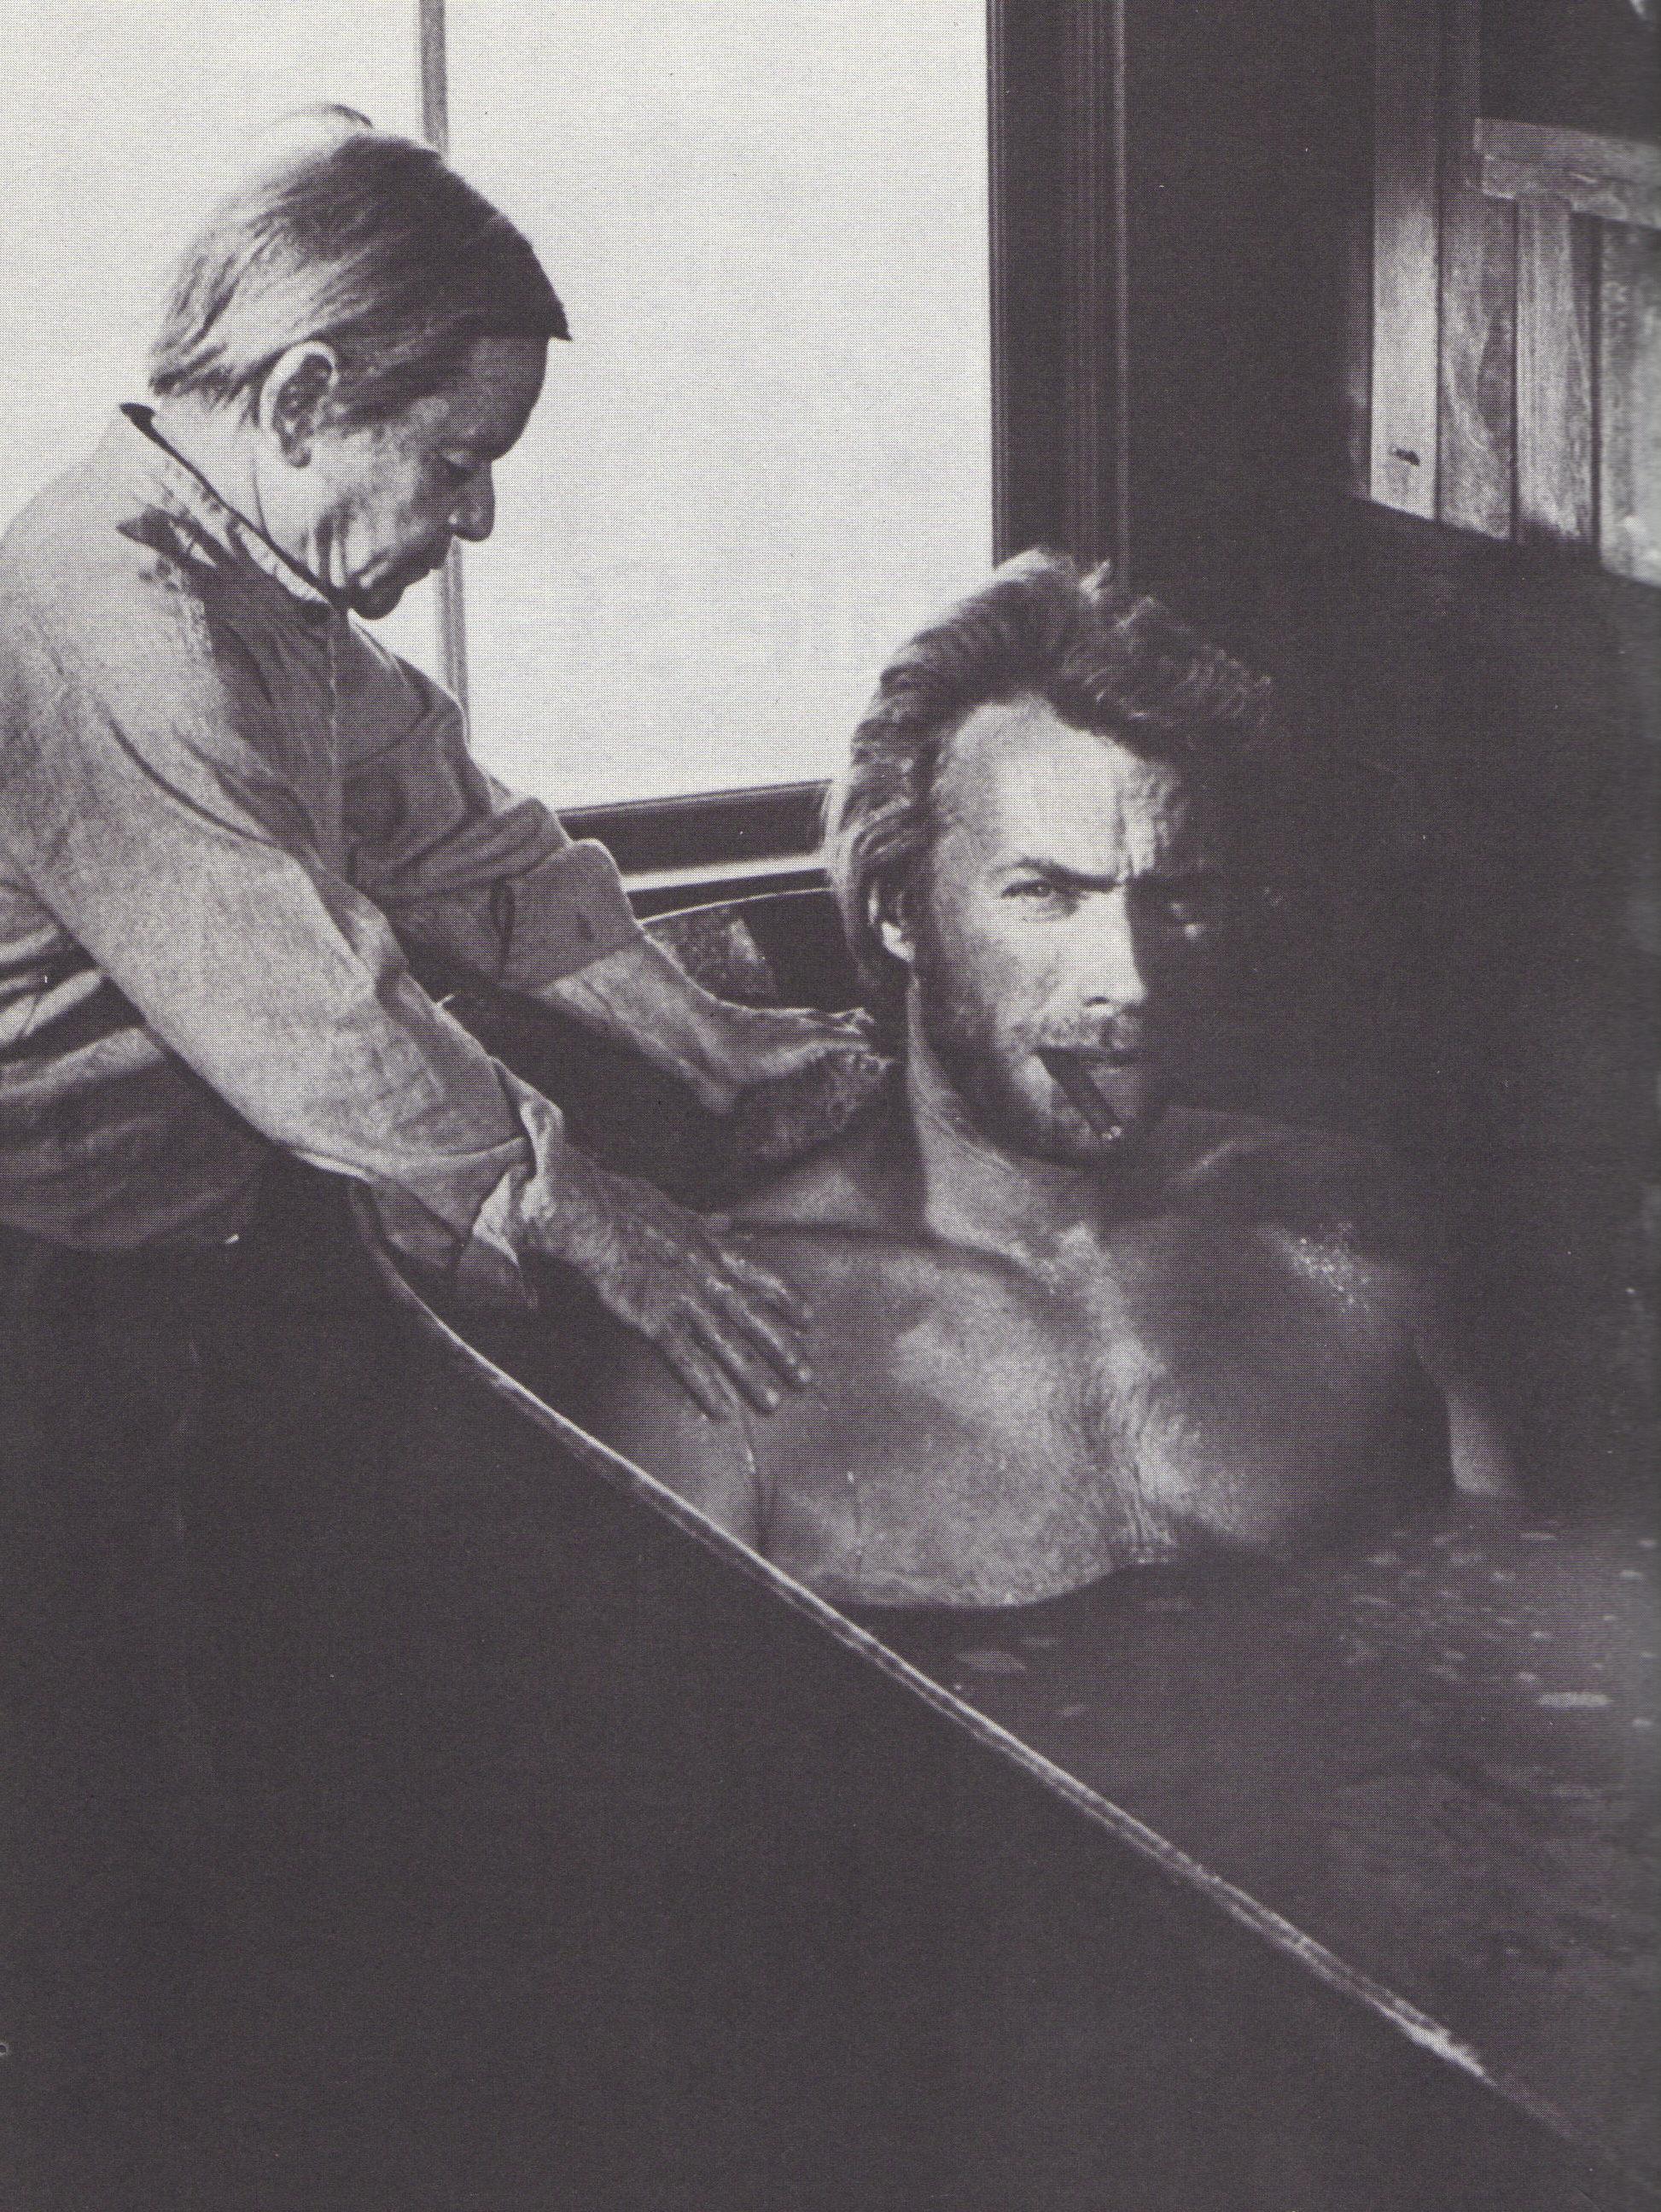 clint-eastwood-and-billy-curtis-in-high-plains-drifter.jpg